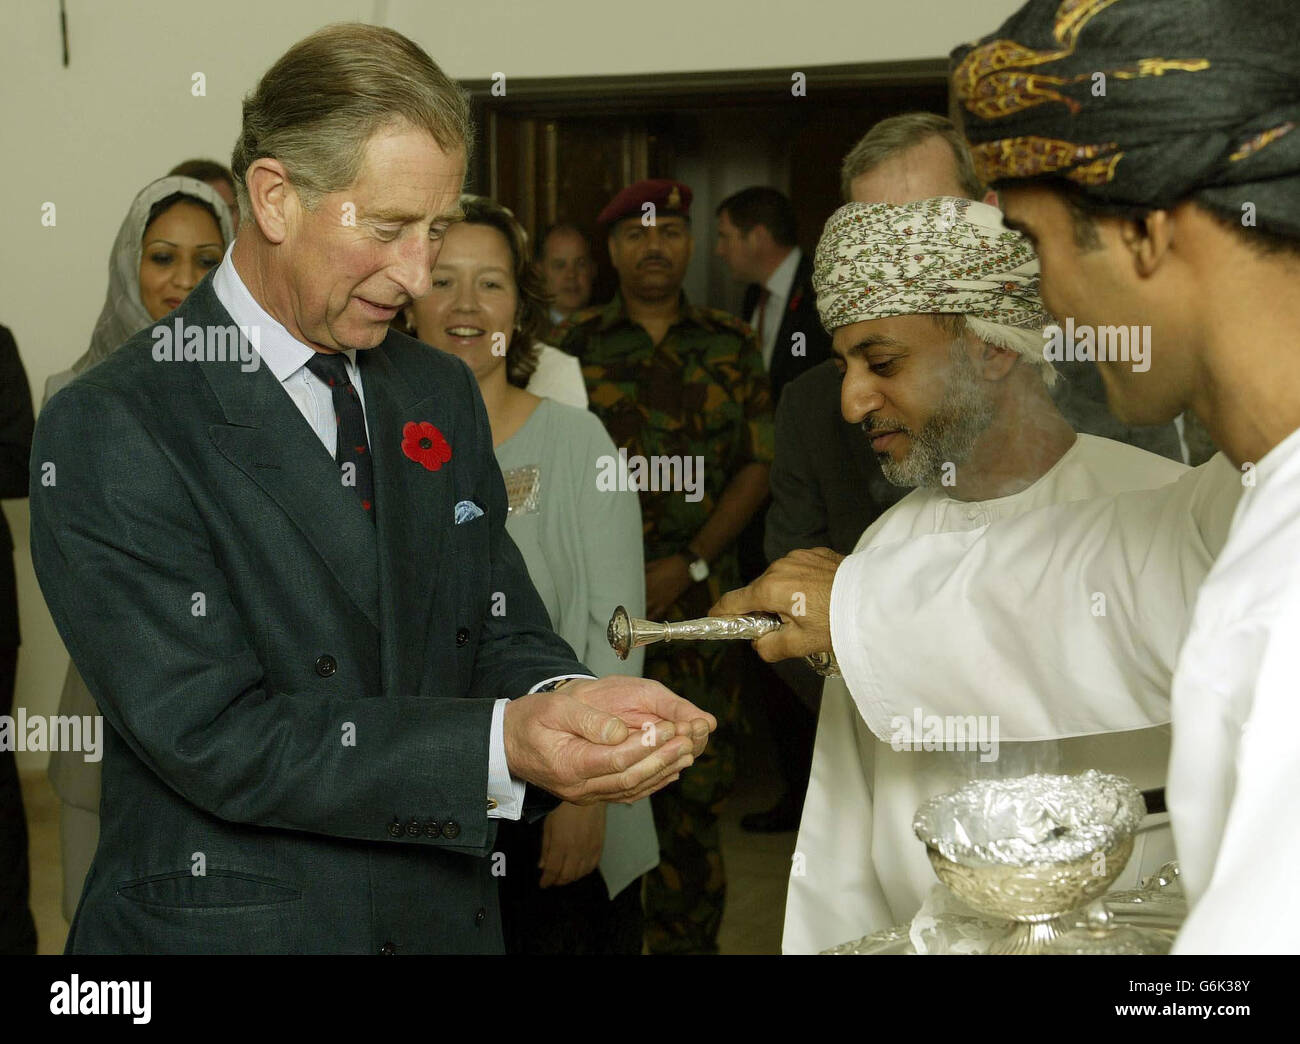 The Prince of Wales is asked to wash his hands with rose-water in the traditional manner as he arrives at the Baital-Zubair Museum in Old Muscat, the Capital of the Oman in the middle East. The Prince arrived in the country from India yesterday, and will attend several engagements until he departs home Sunday lunchtime. Stock Photo